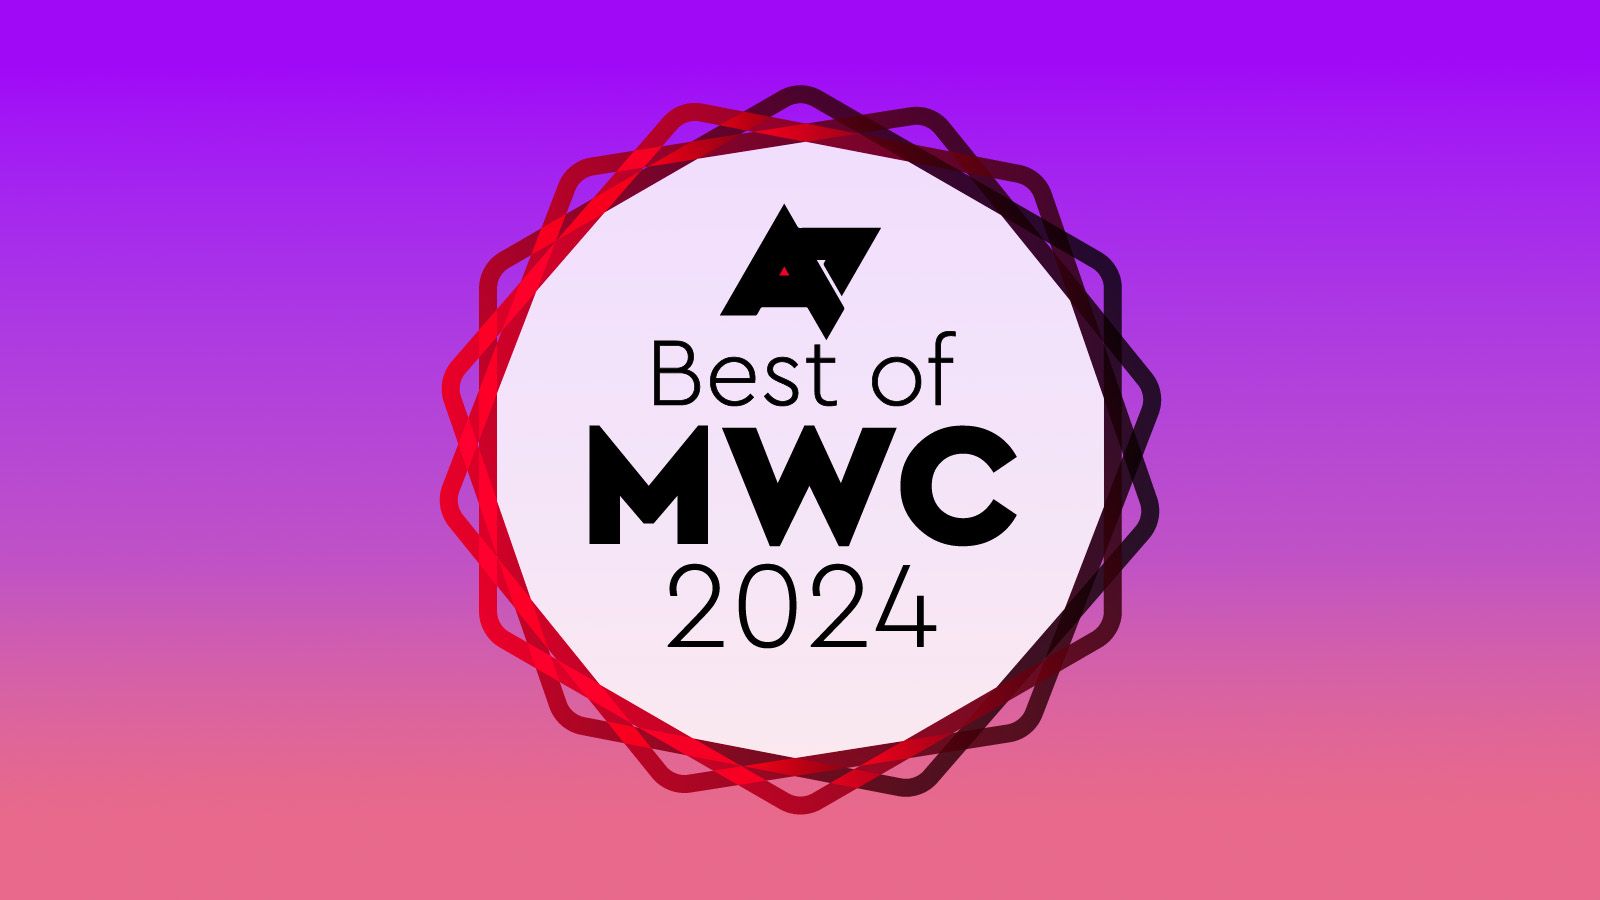 Best of MWC 2024 Android Police awards image with a logo in front of a purple-pink gradient background